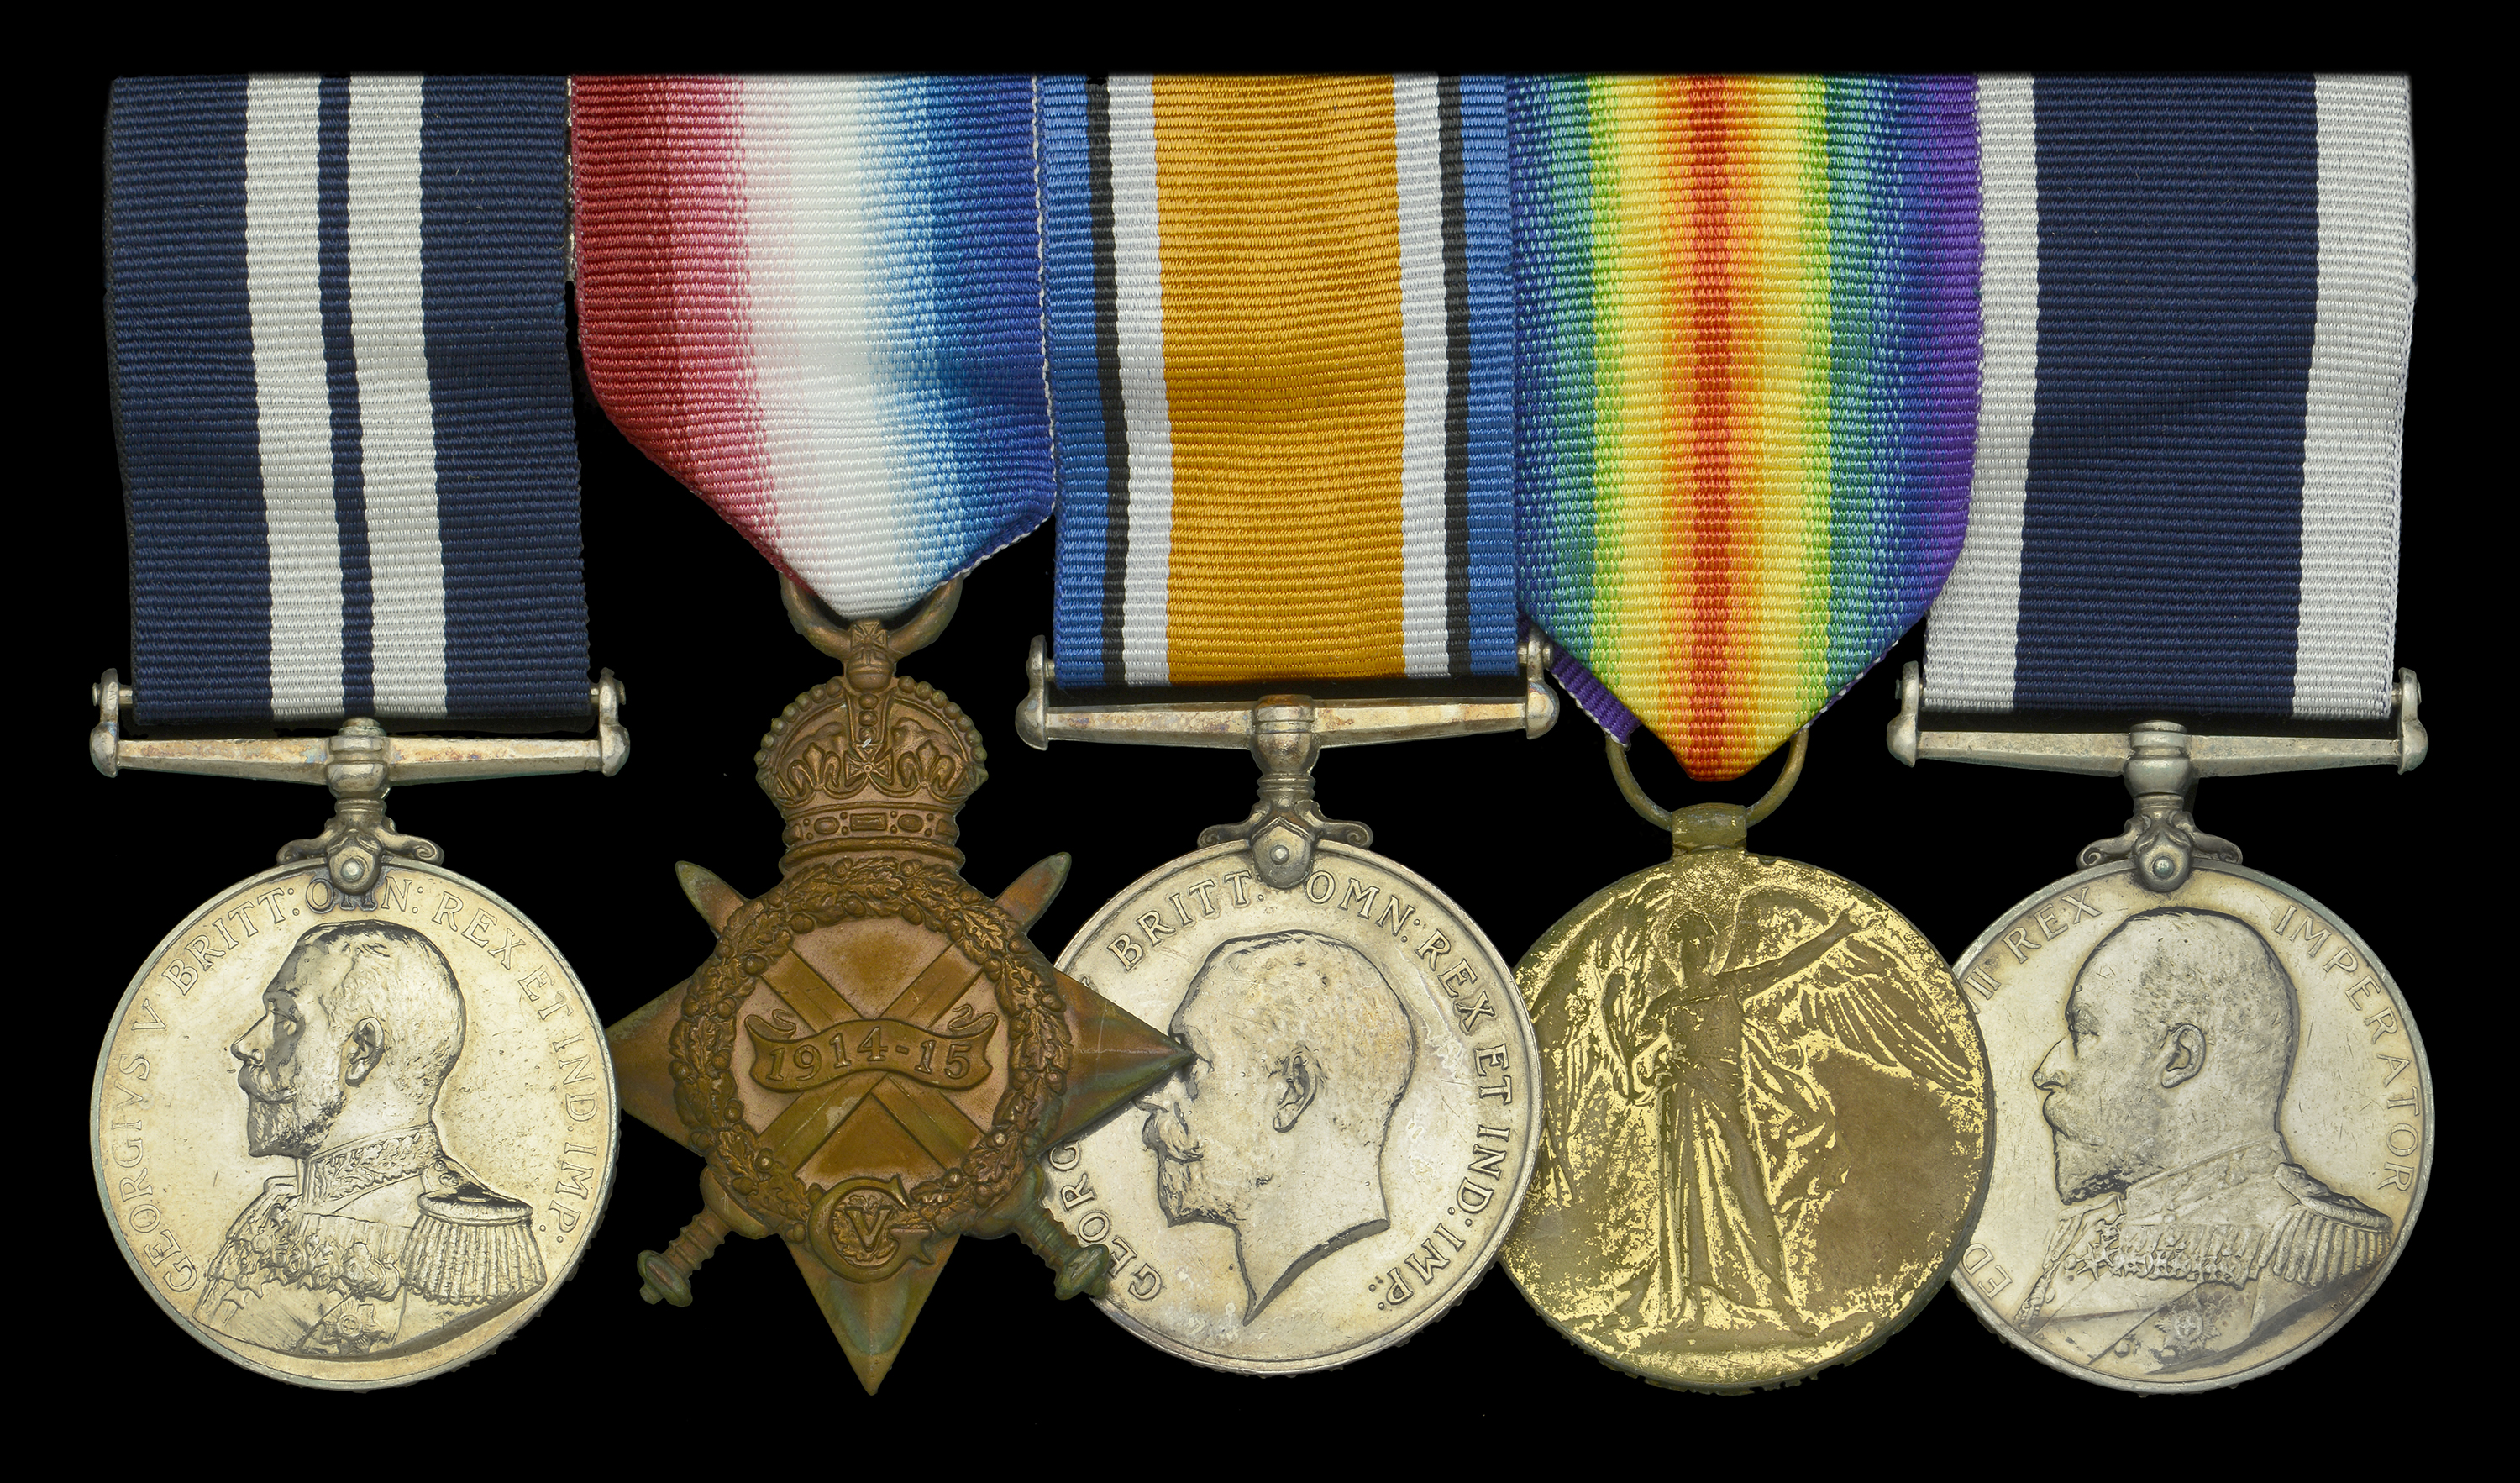 A Great War 'Battle of Jutland' D.S.M. group of five awarded to Chief Petty Officer J. J. Gr...